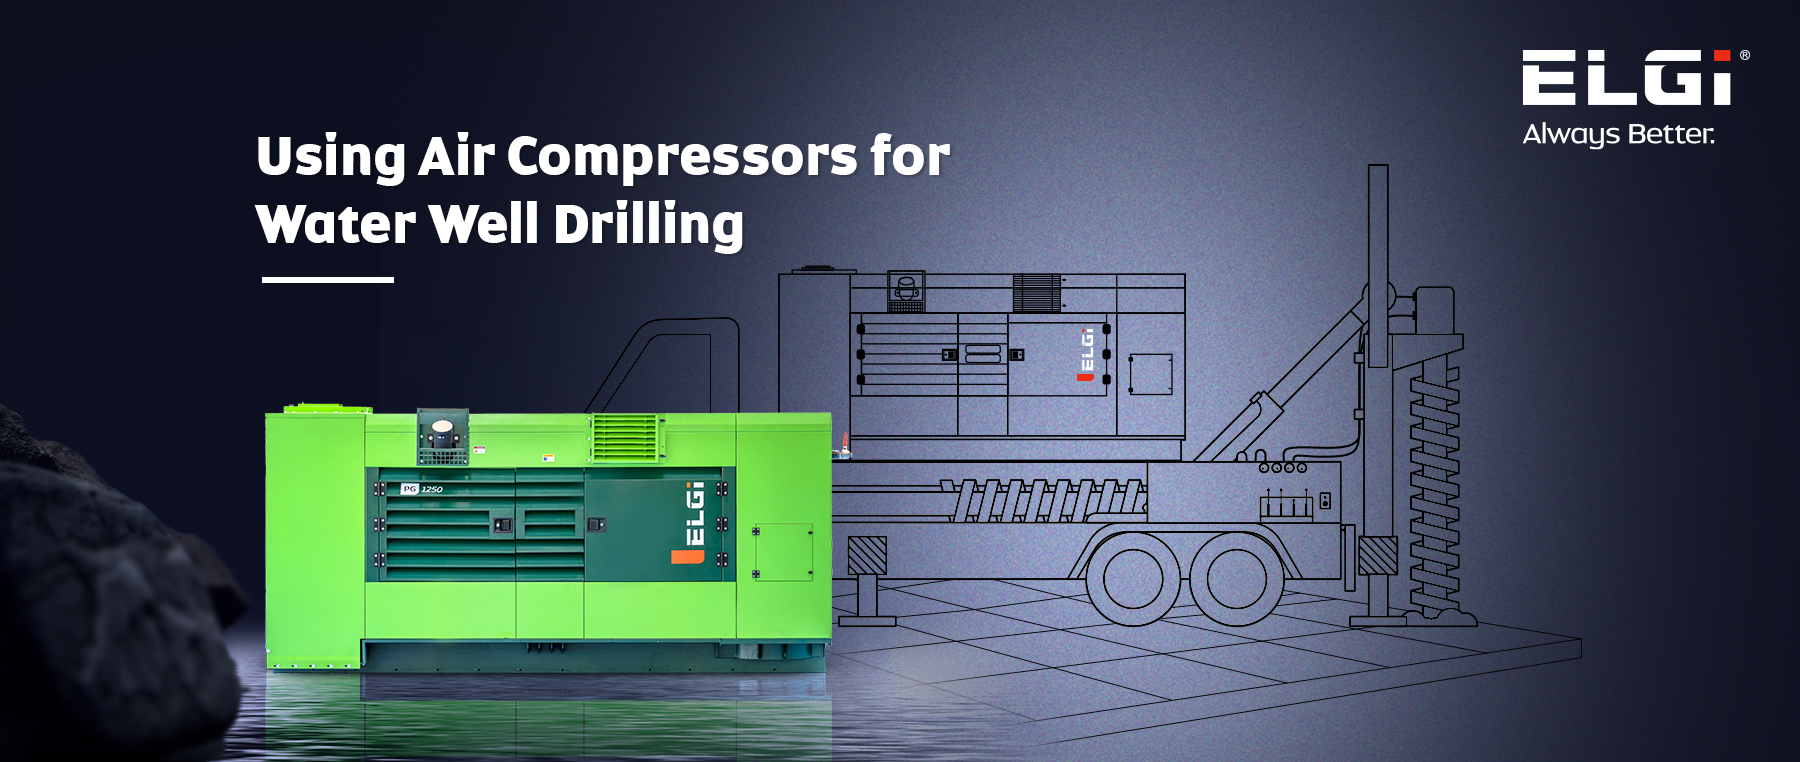 What is the best way to choose the appropriate compressor for your water well?